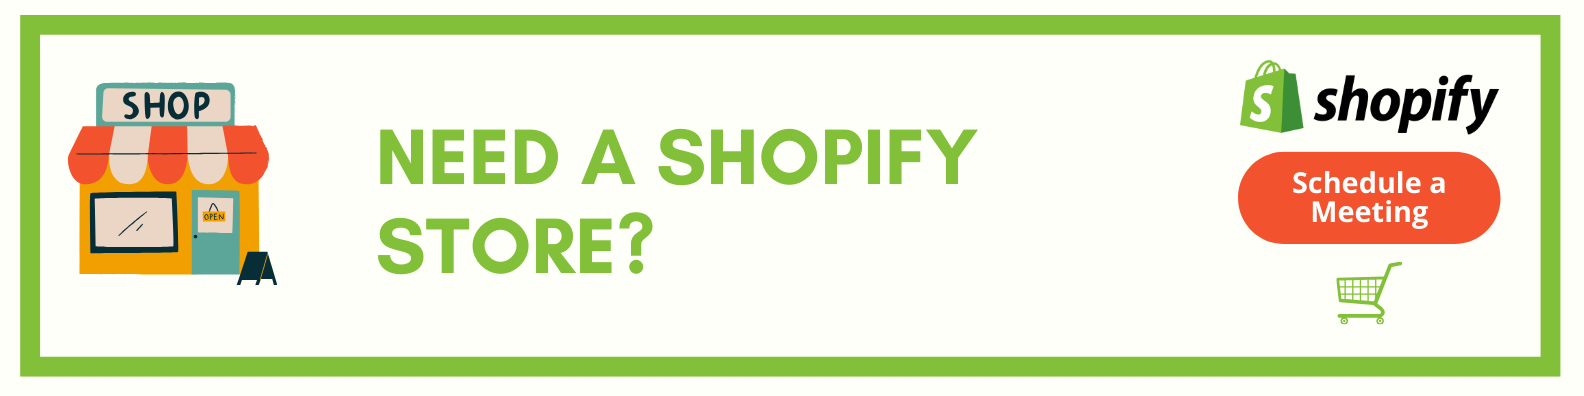 Need a shopify Store?